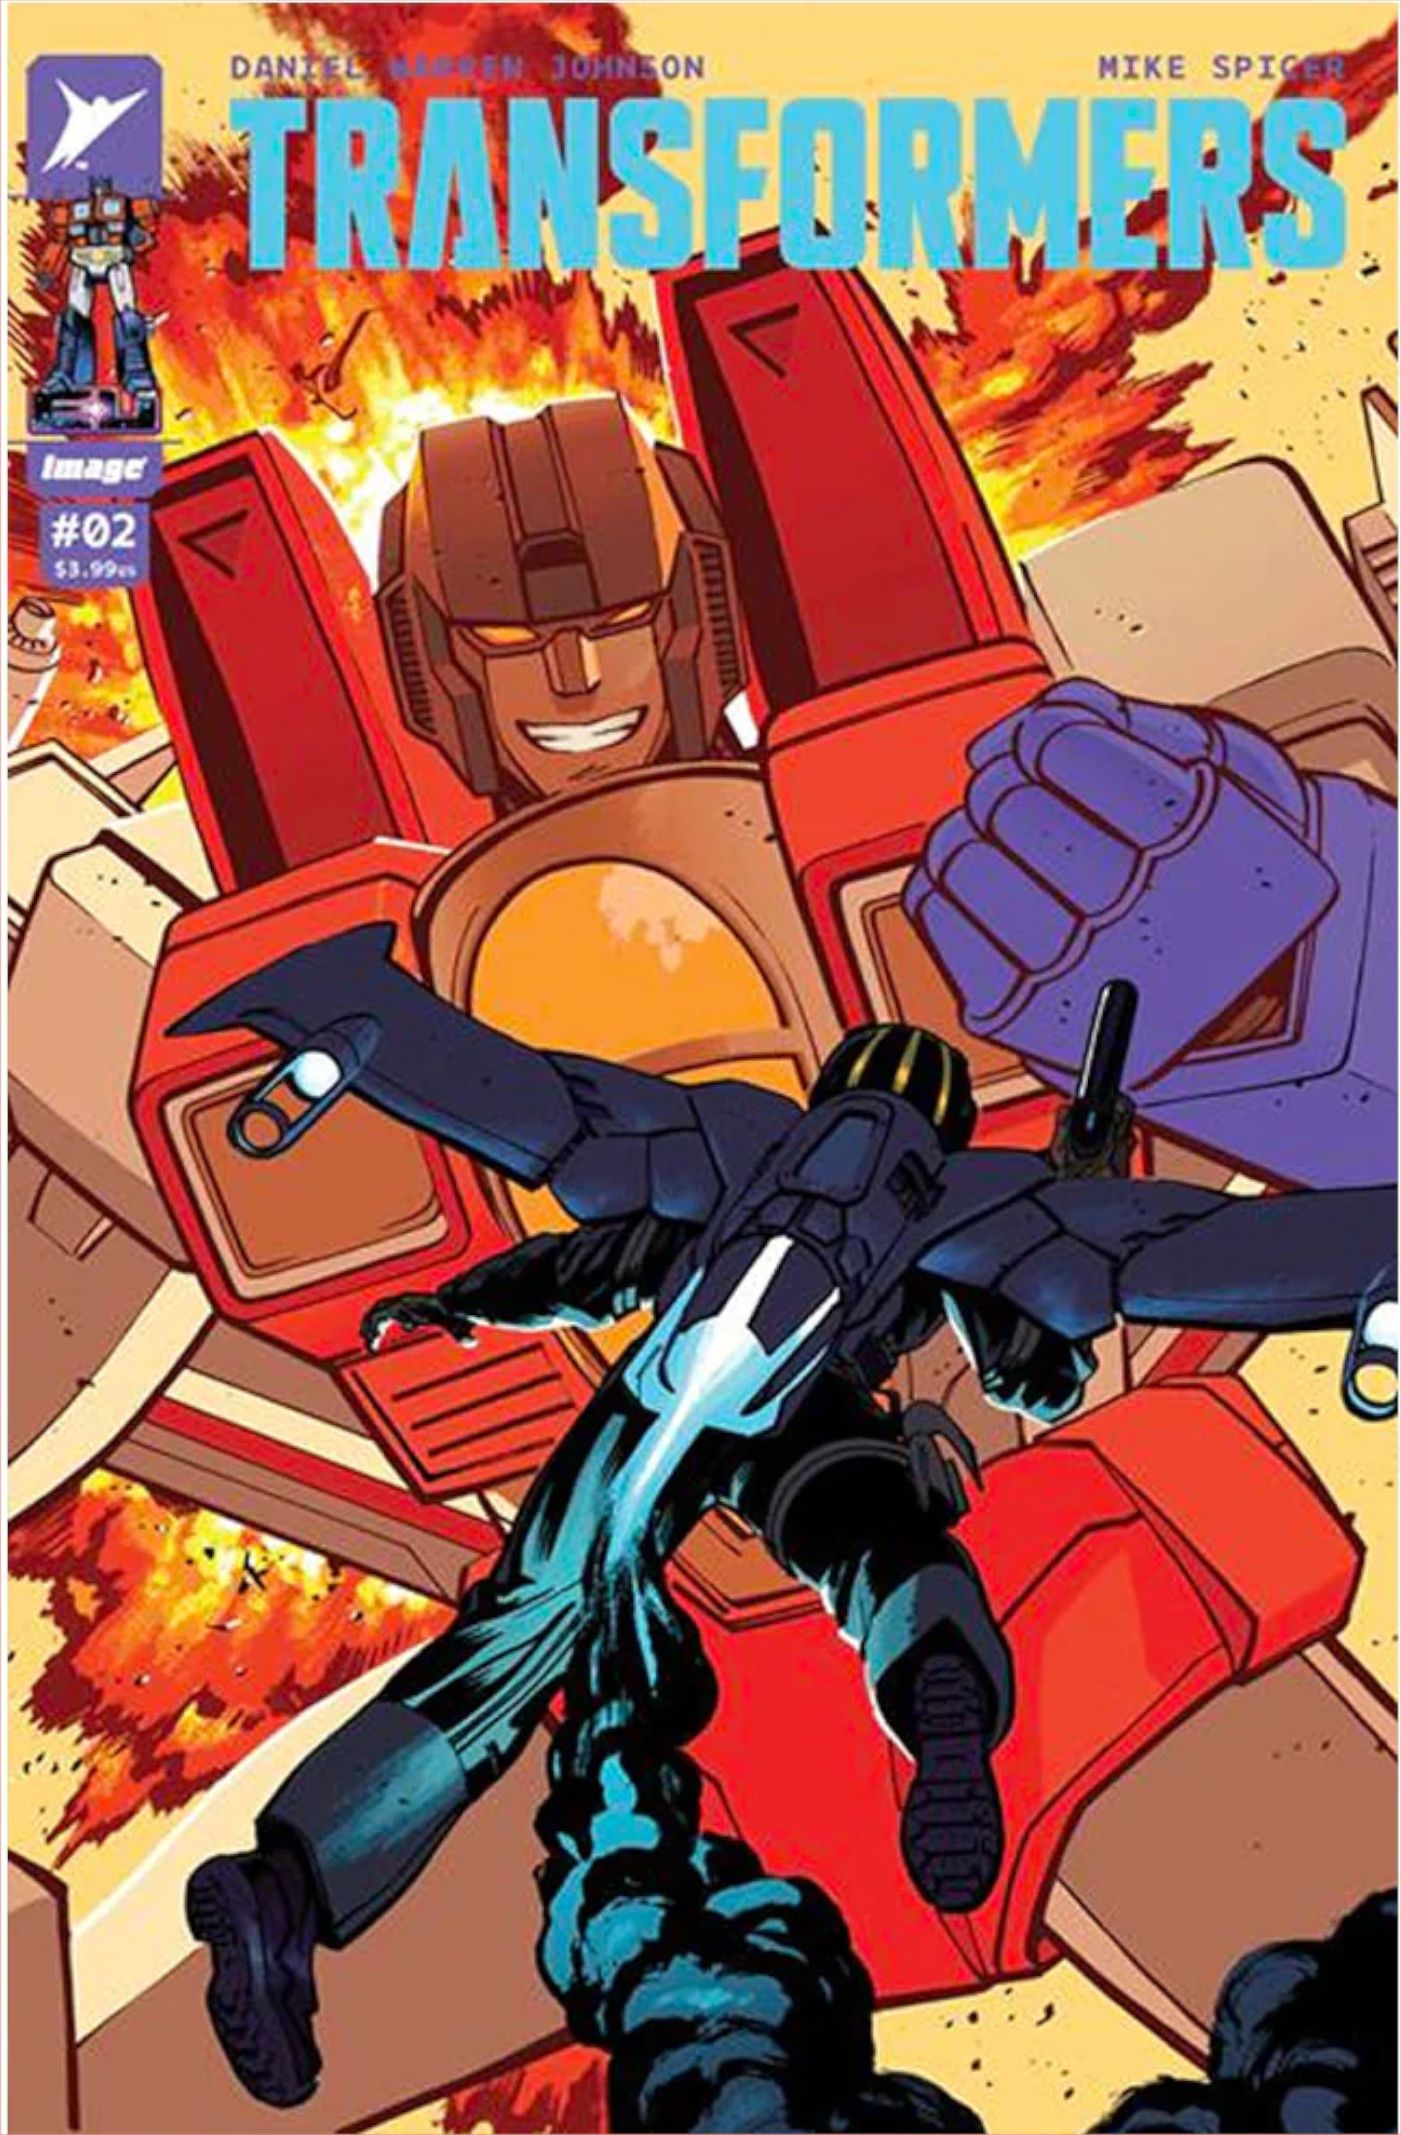 Transformers #2 Variant Cover by Tom Reilly